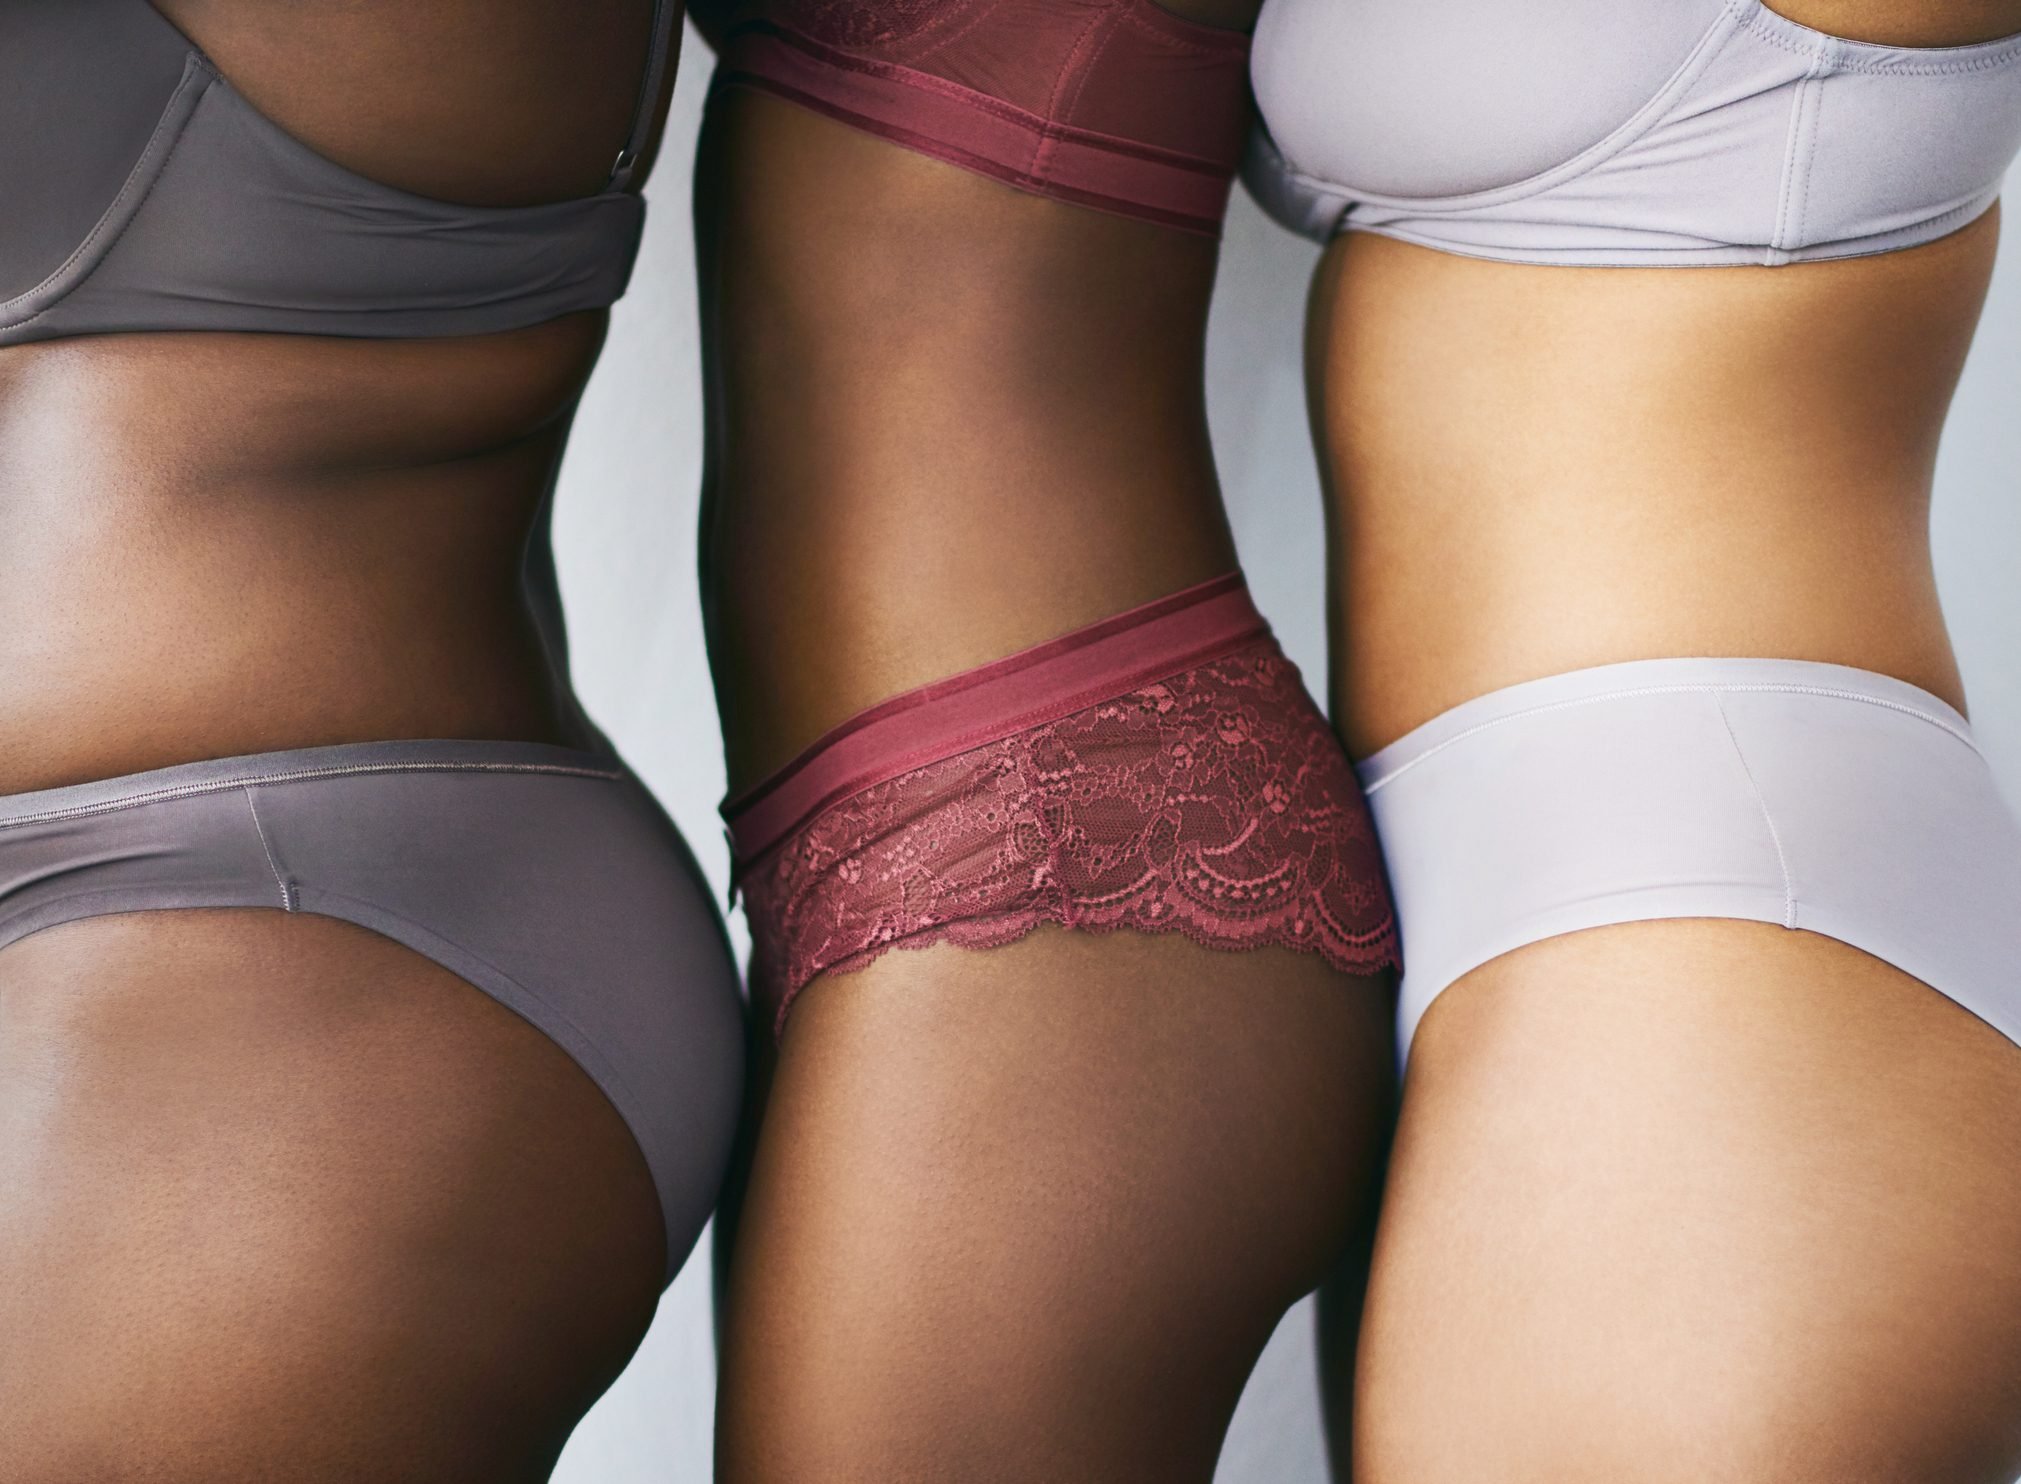 8 Underwear Mistakes That Can Mess With Your Health The HealthyReaders Digest